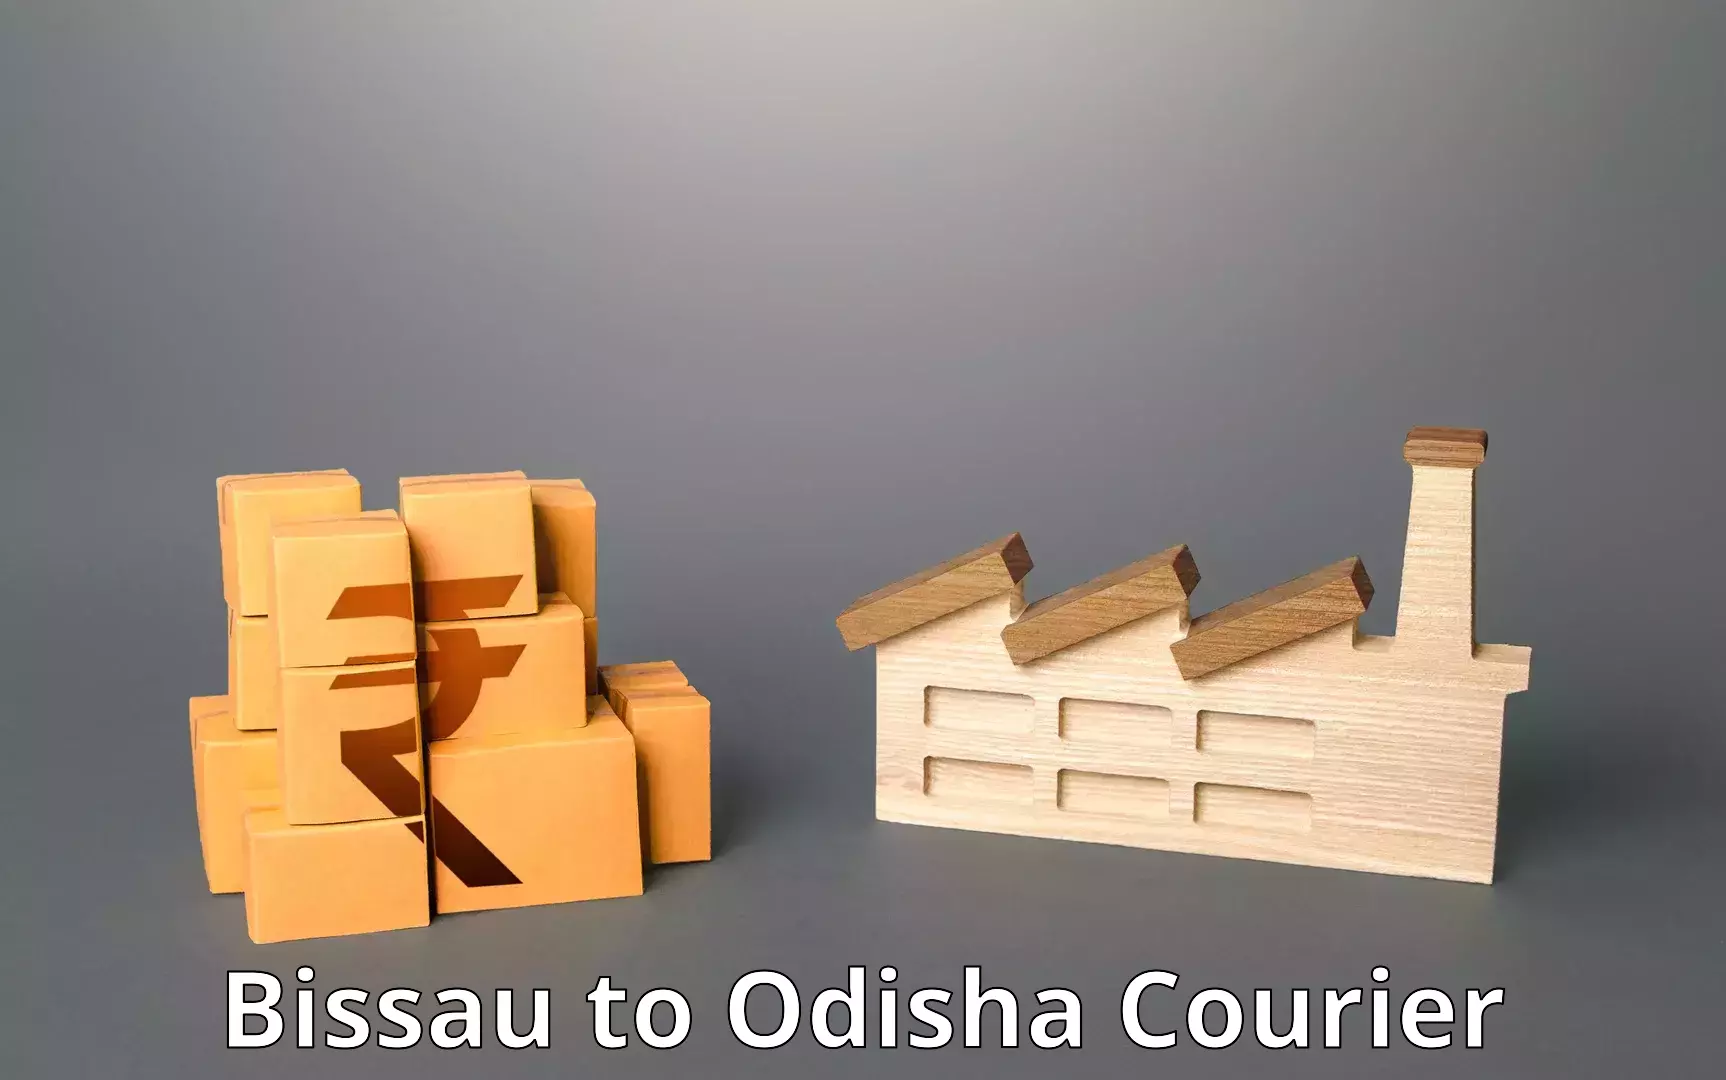 State-of-the-art courier technology Bissau to Sukinda